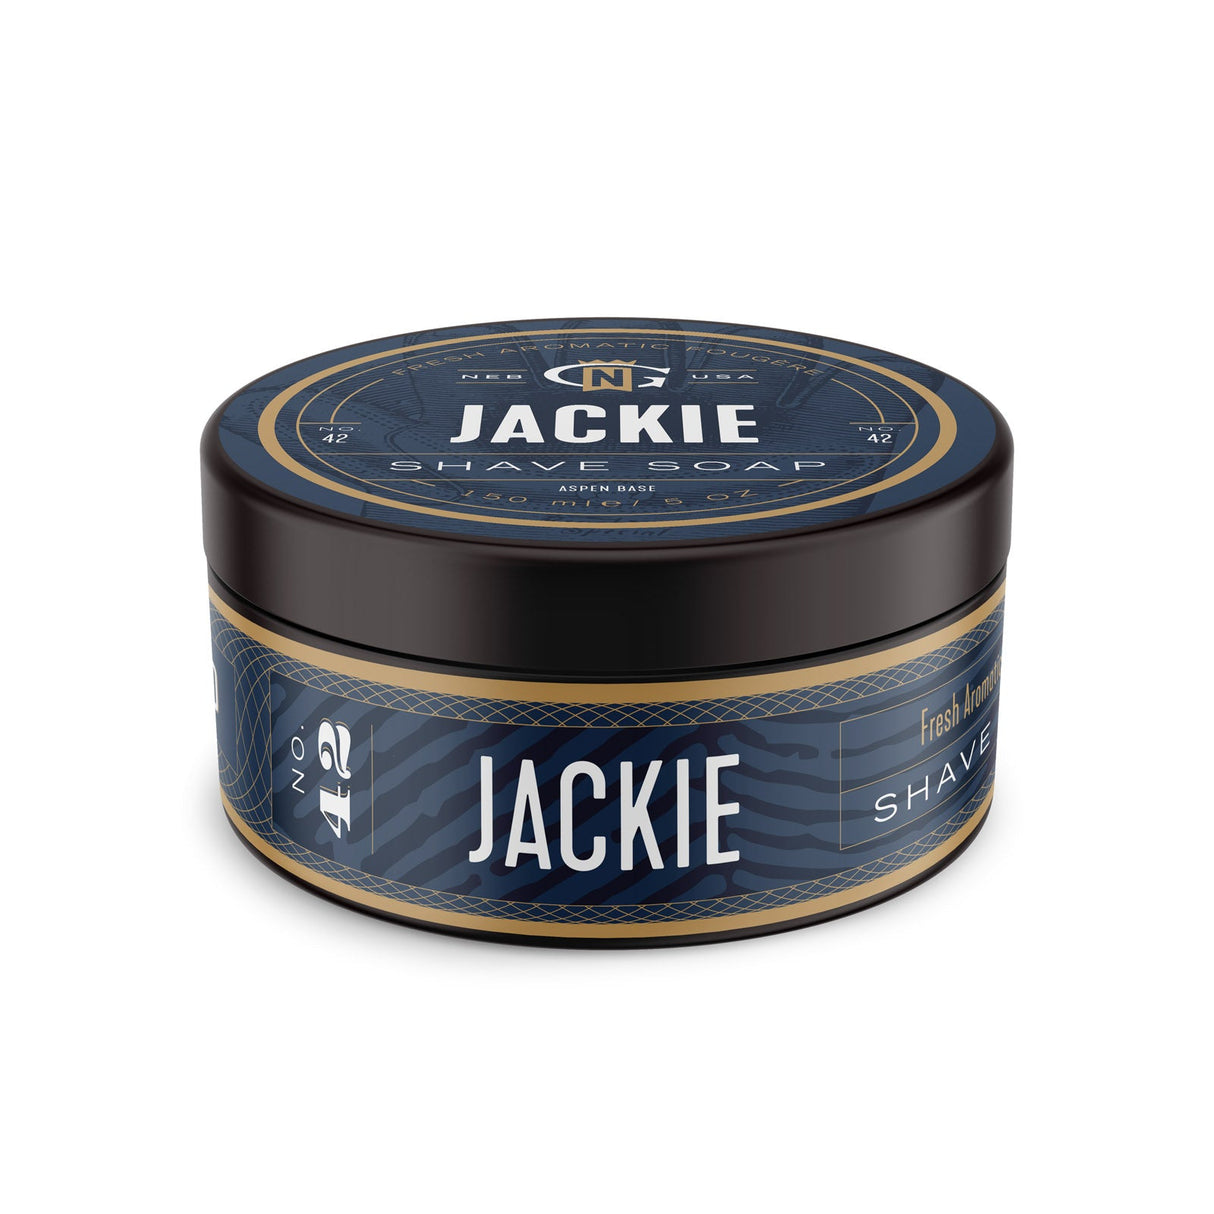 Gentleman's Nod - Jackie - Non-Cooled Summer Edition in New C4 Base - Shave Soap